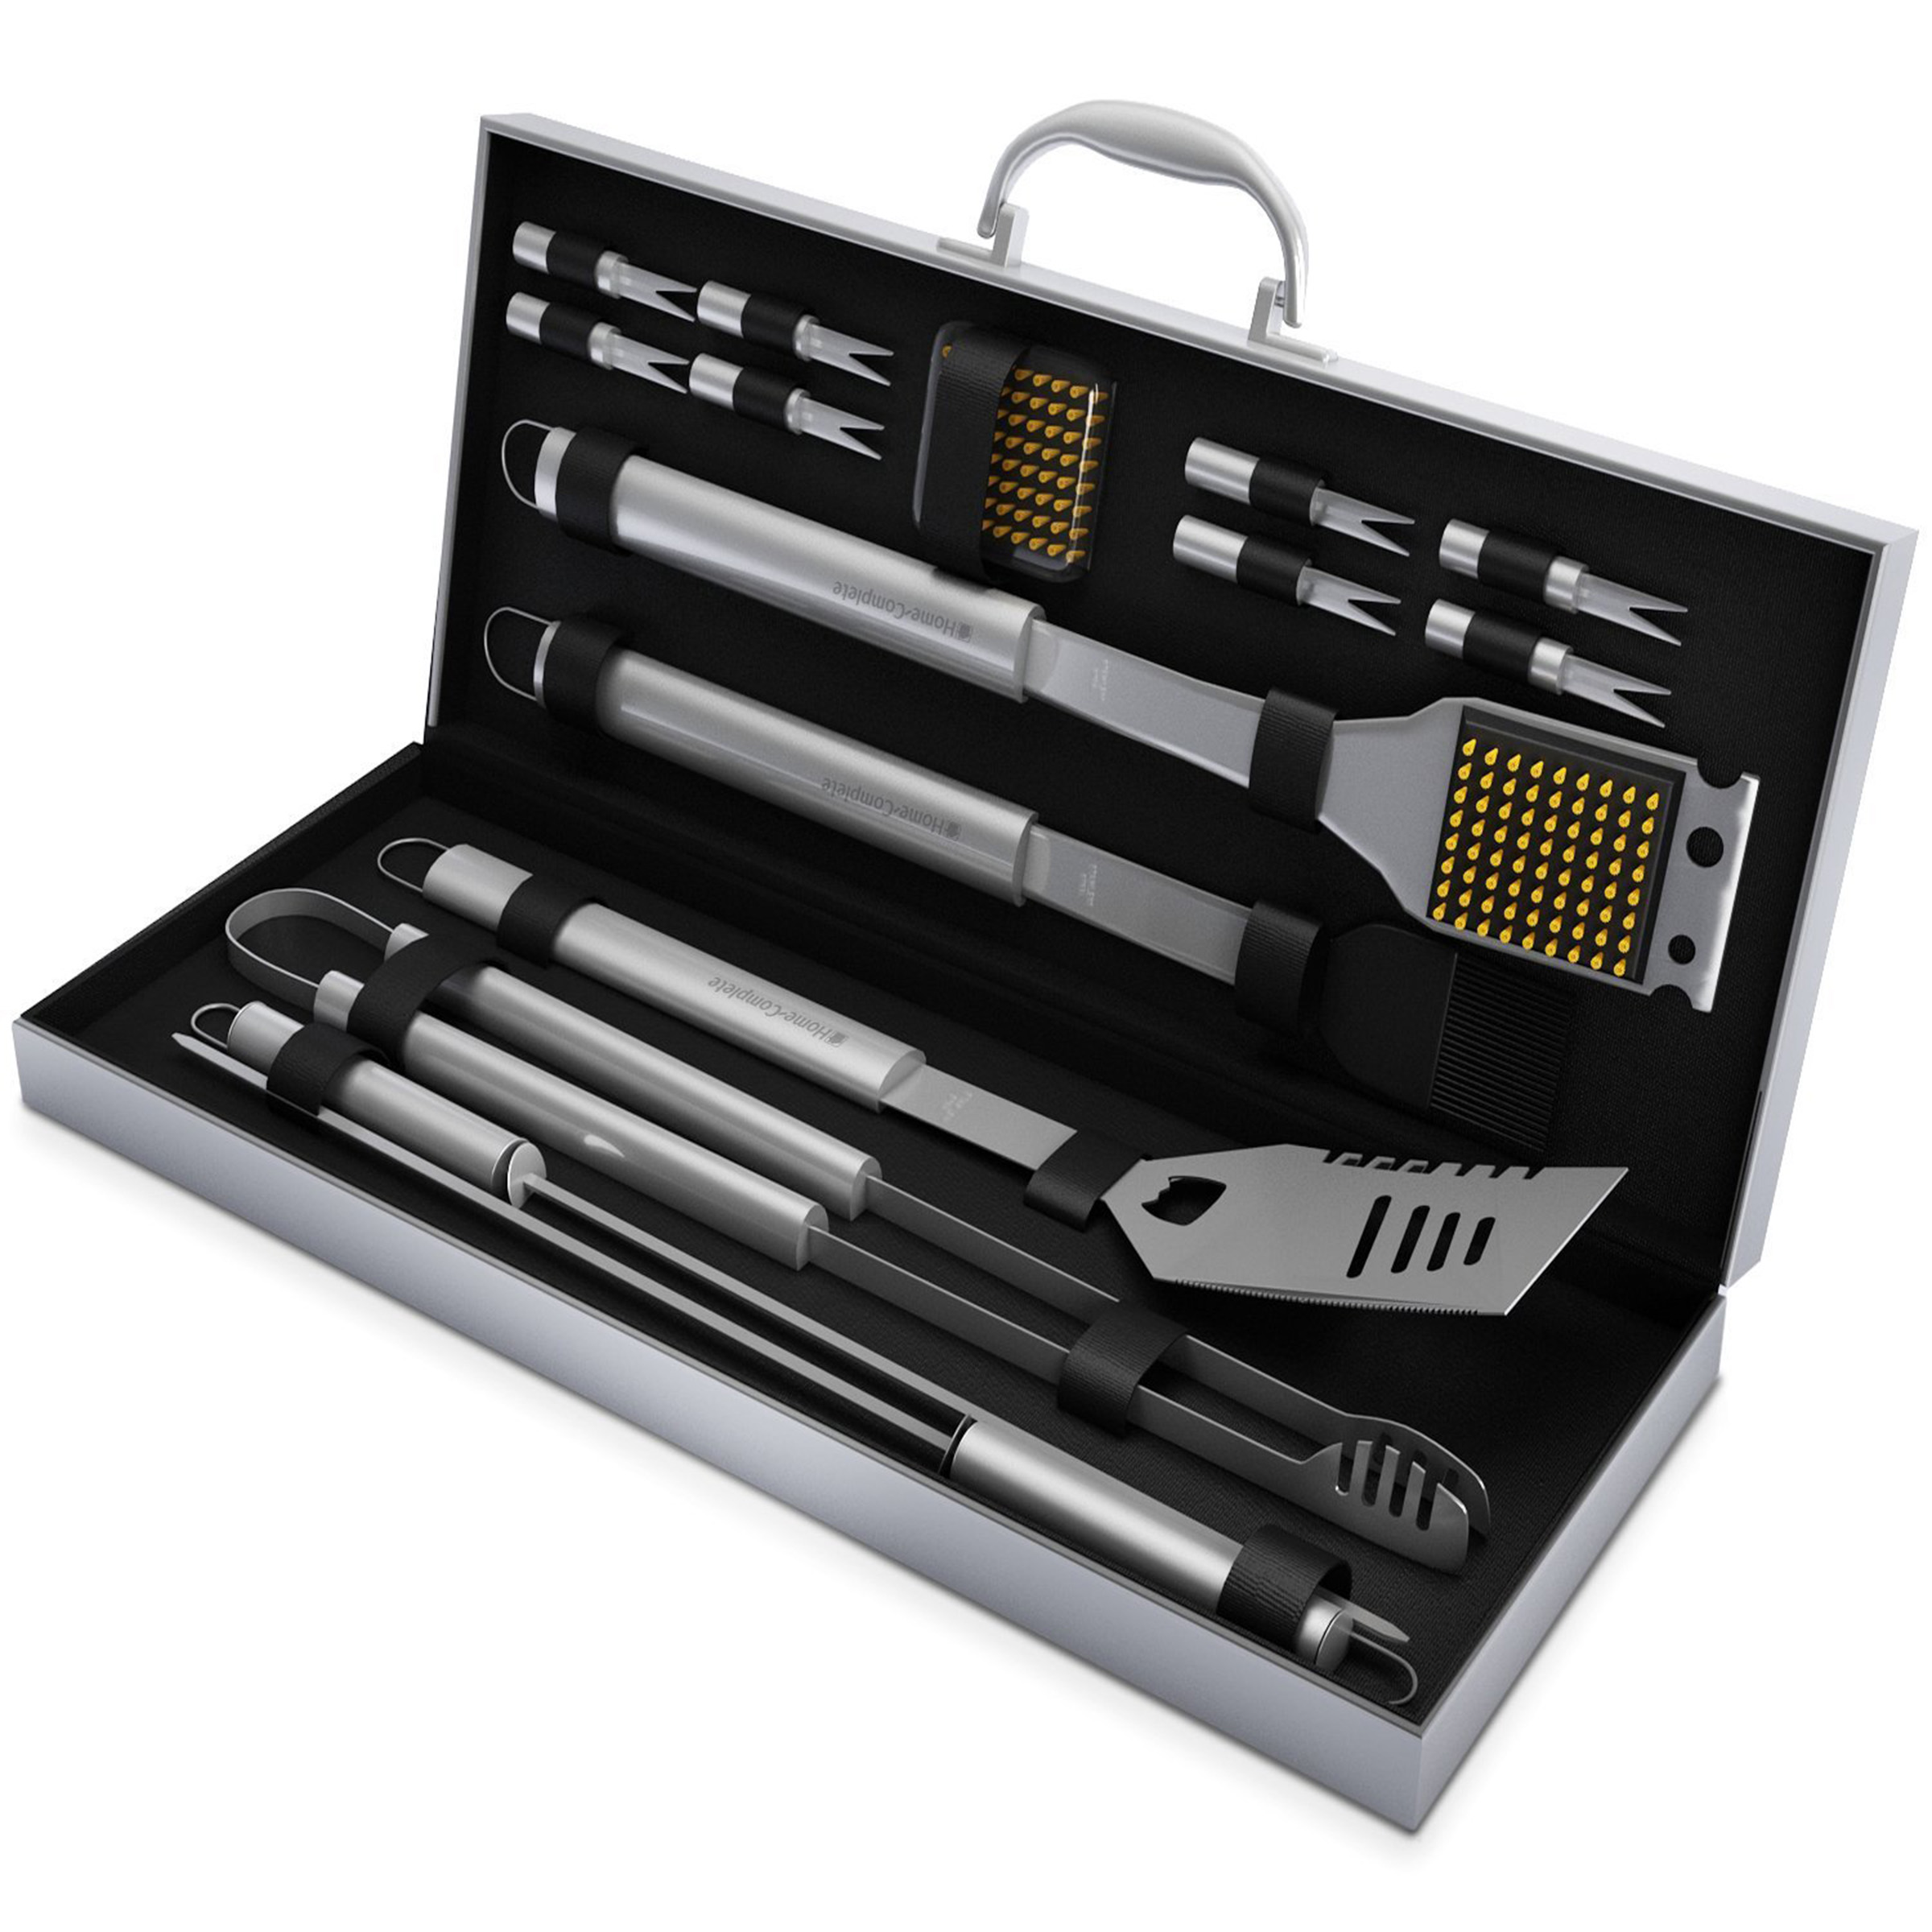 BBQ Grill Tool Set- 16 Piece High Quality Stainless Steel Barbecue Grilling Accessories with Aluminum Case Spatula Tongs Skewers By Home-Complete - image 1 of 8